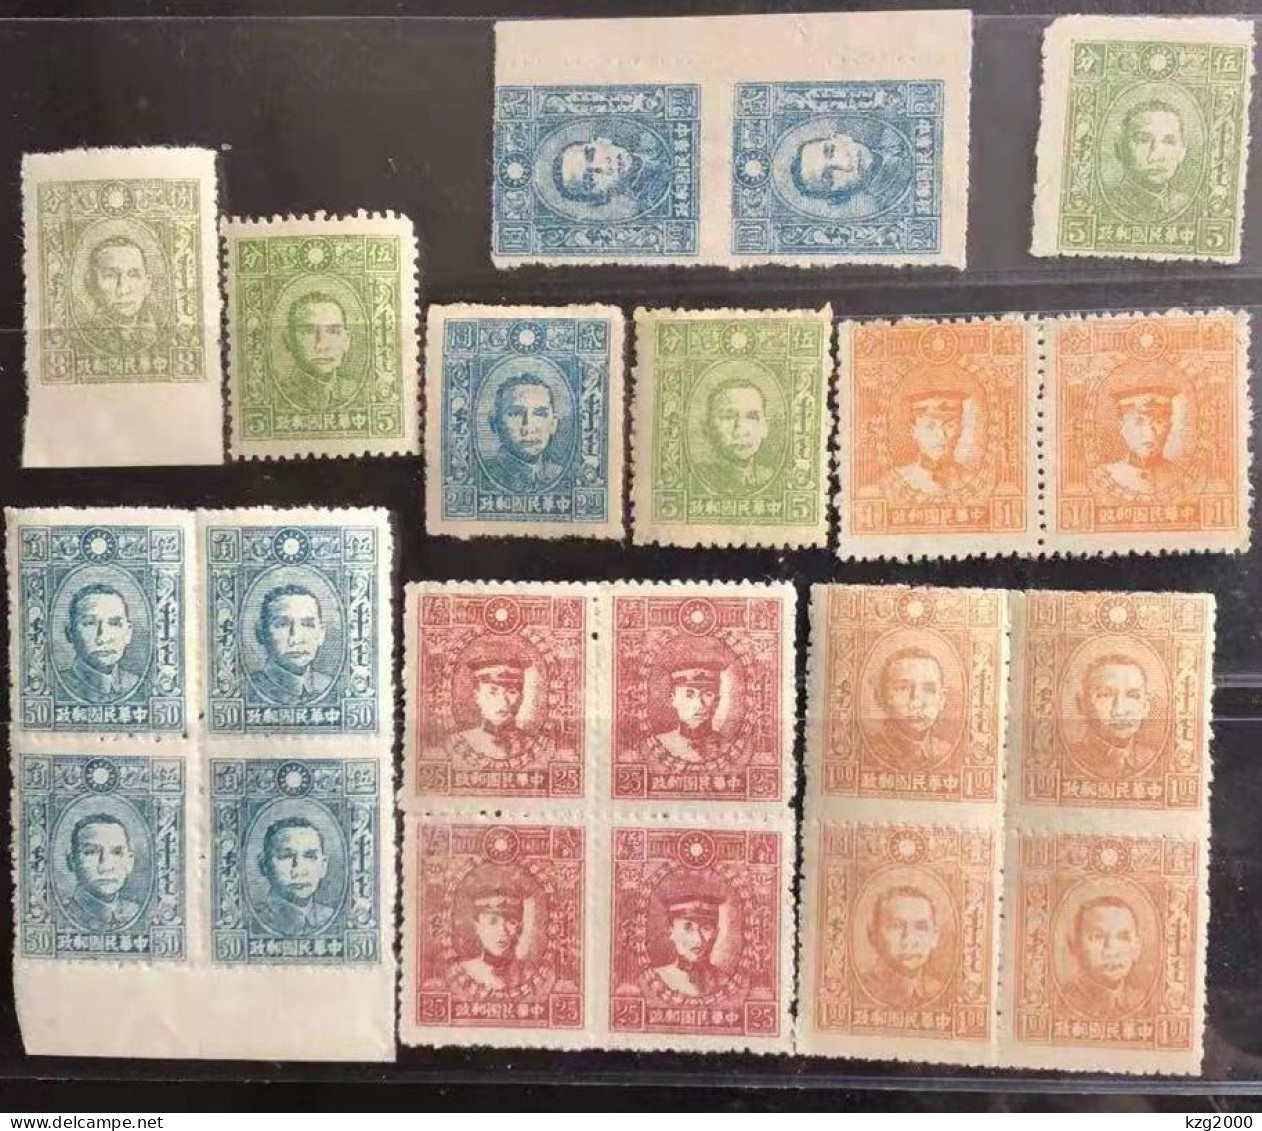 China Stamps 1941 Japanese Occupation China “Meng Jiang” Mongolian Version Unissued - 1941-45 Chine Du Nord